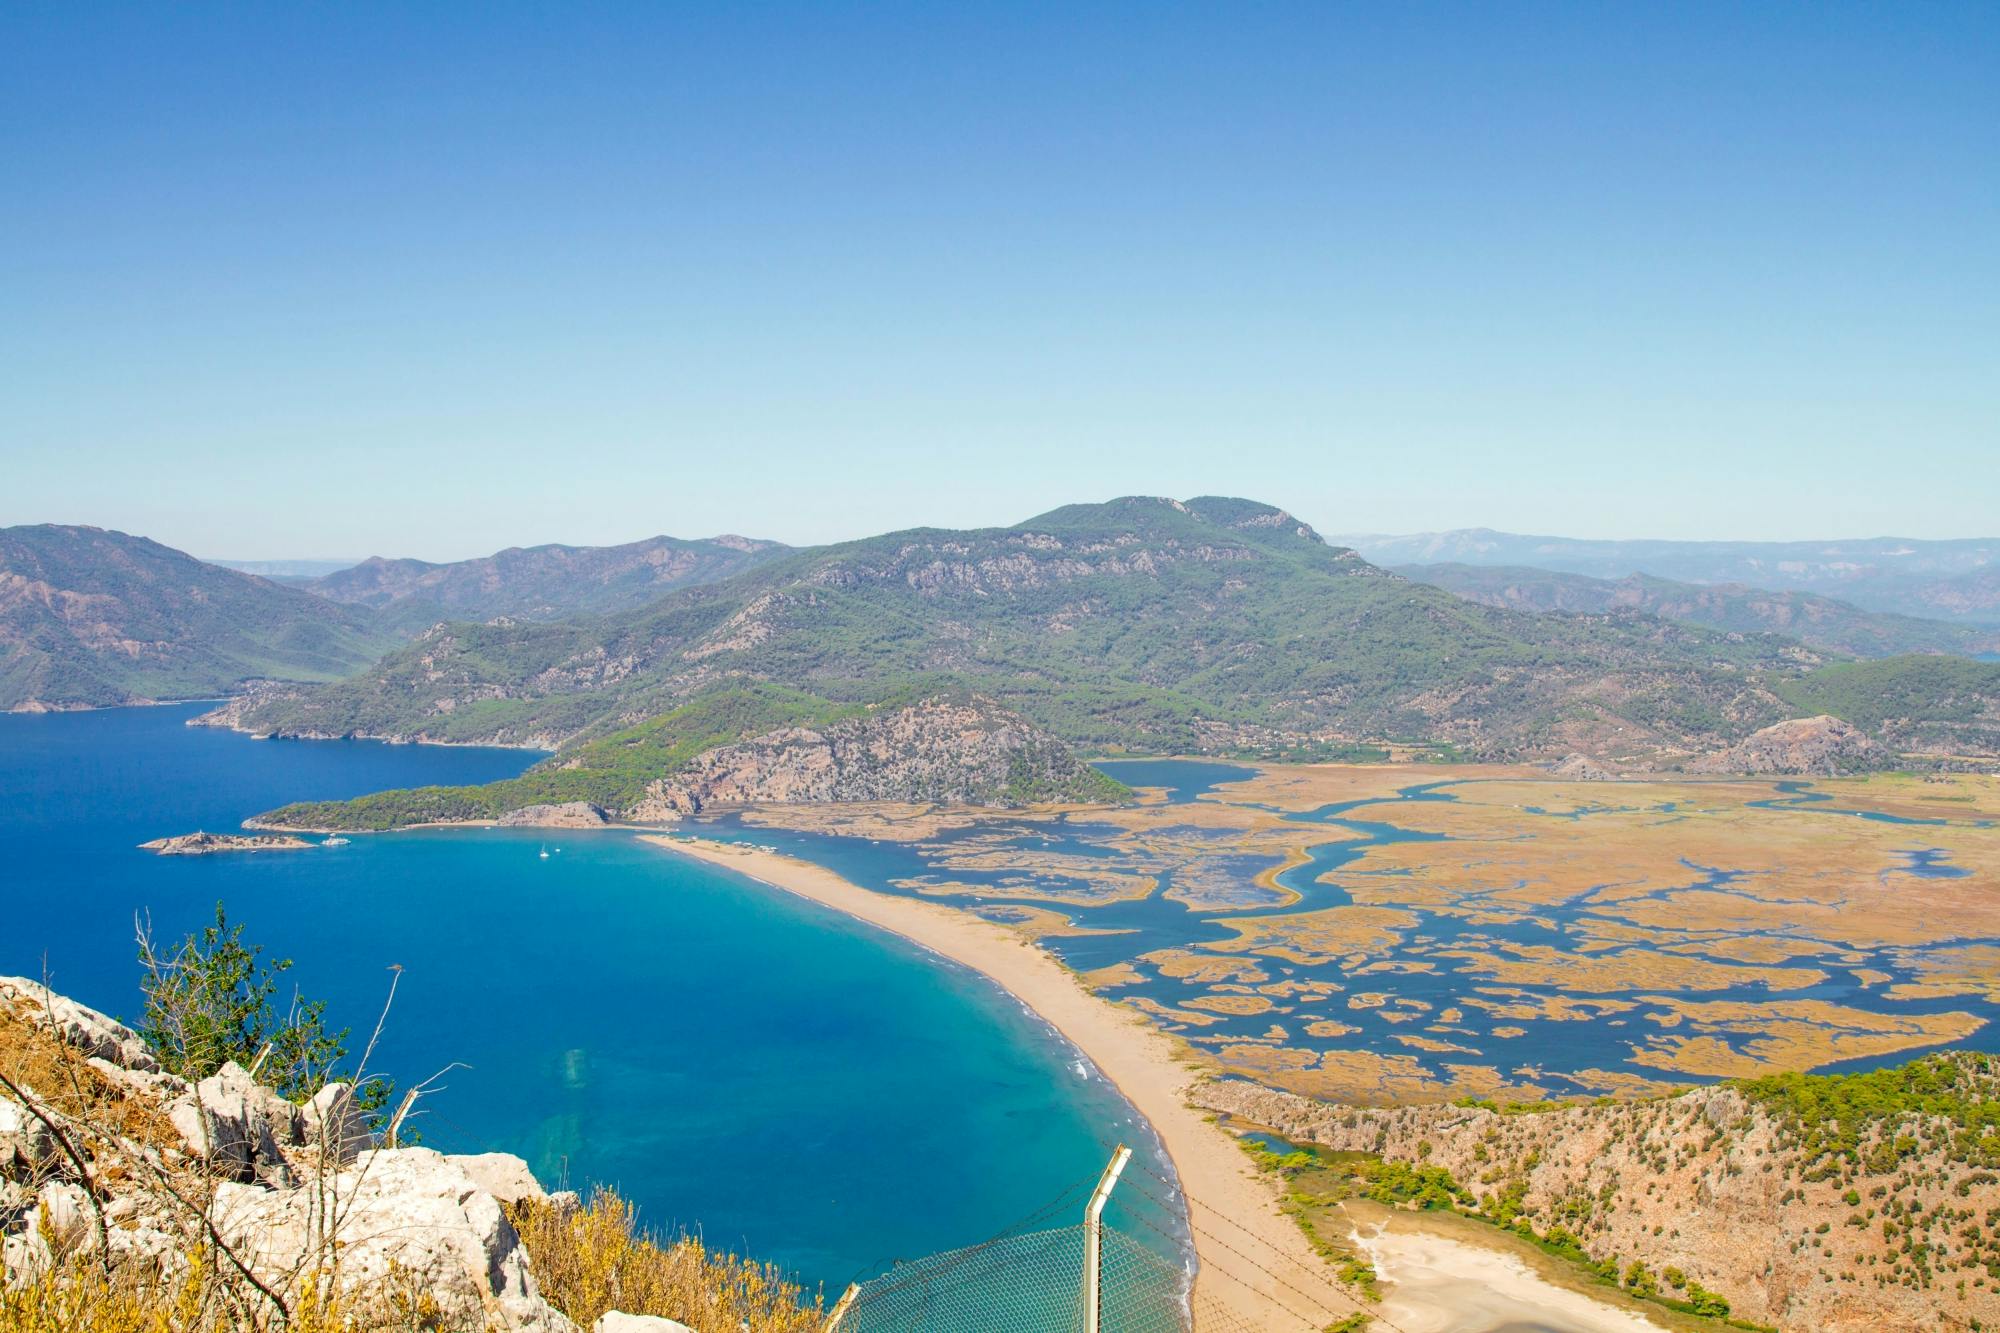 Dalyan Discovery Boat Tour with Turtle Beach and Lunch